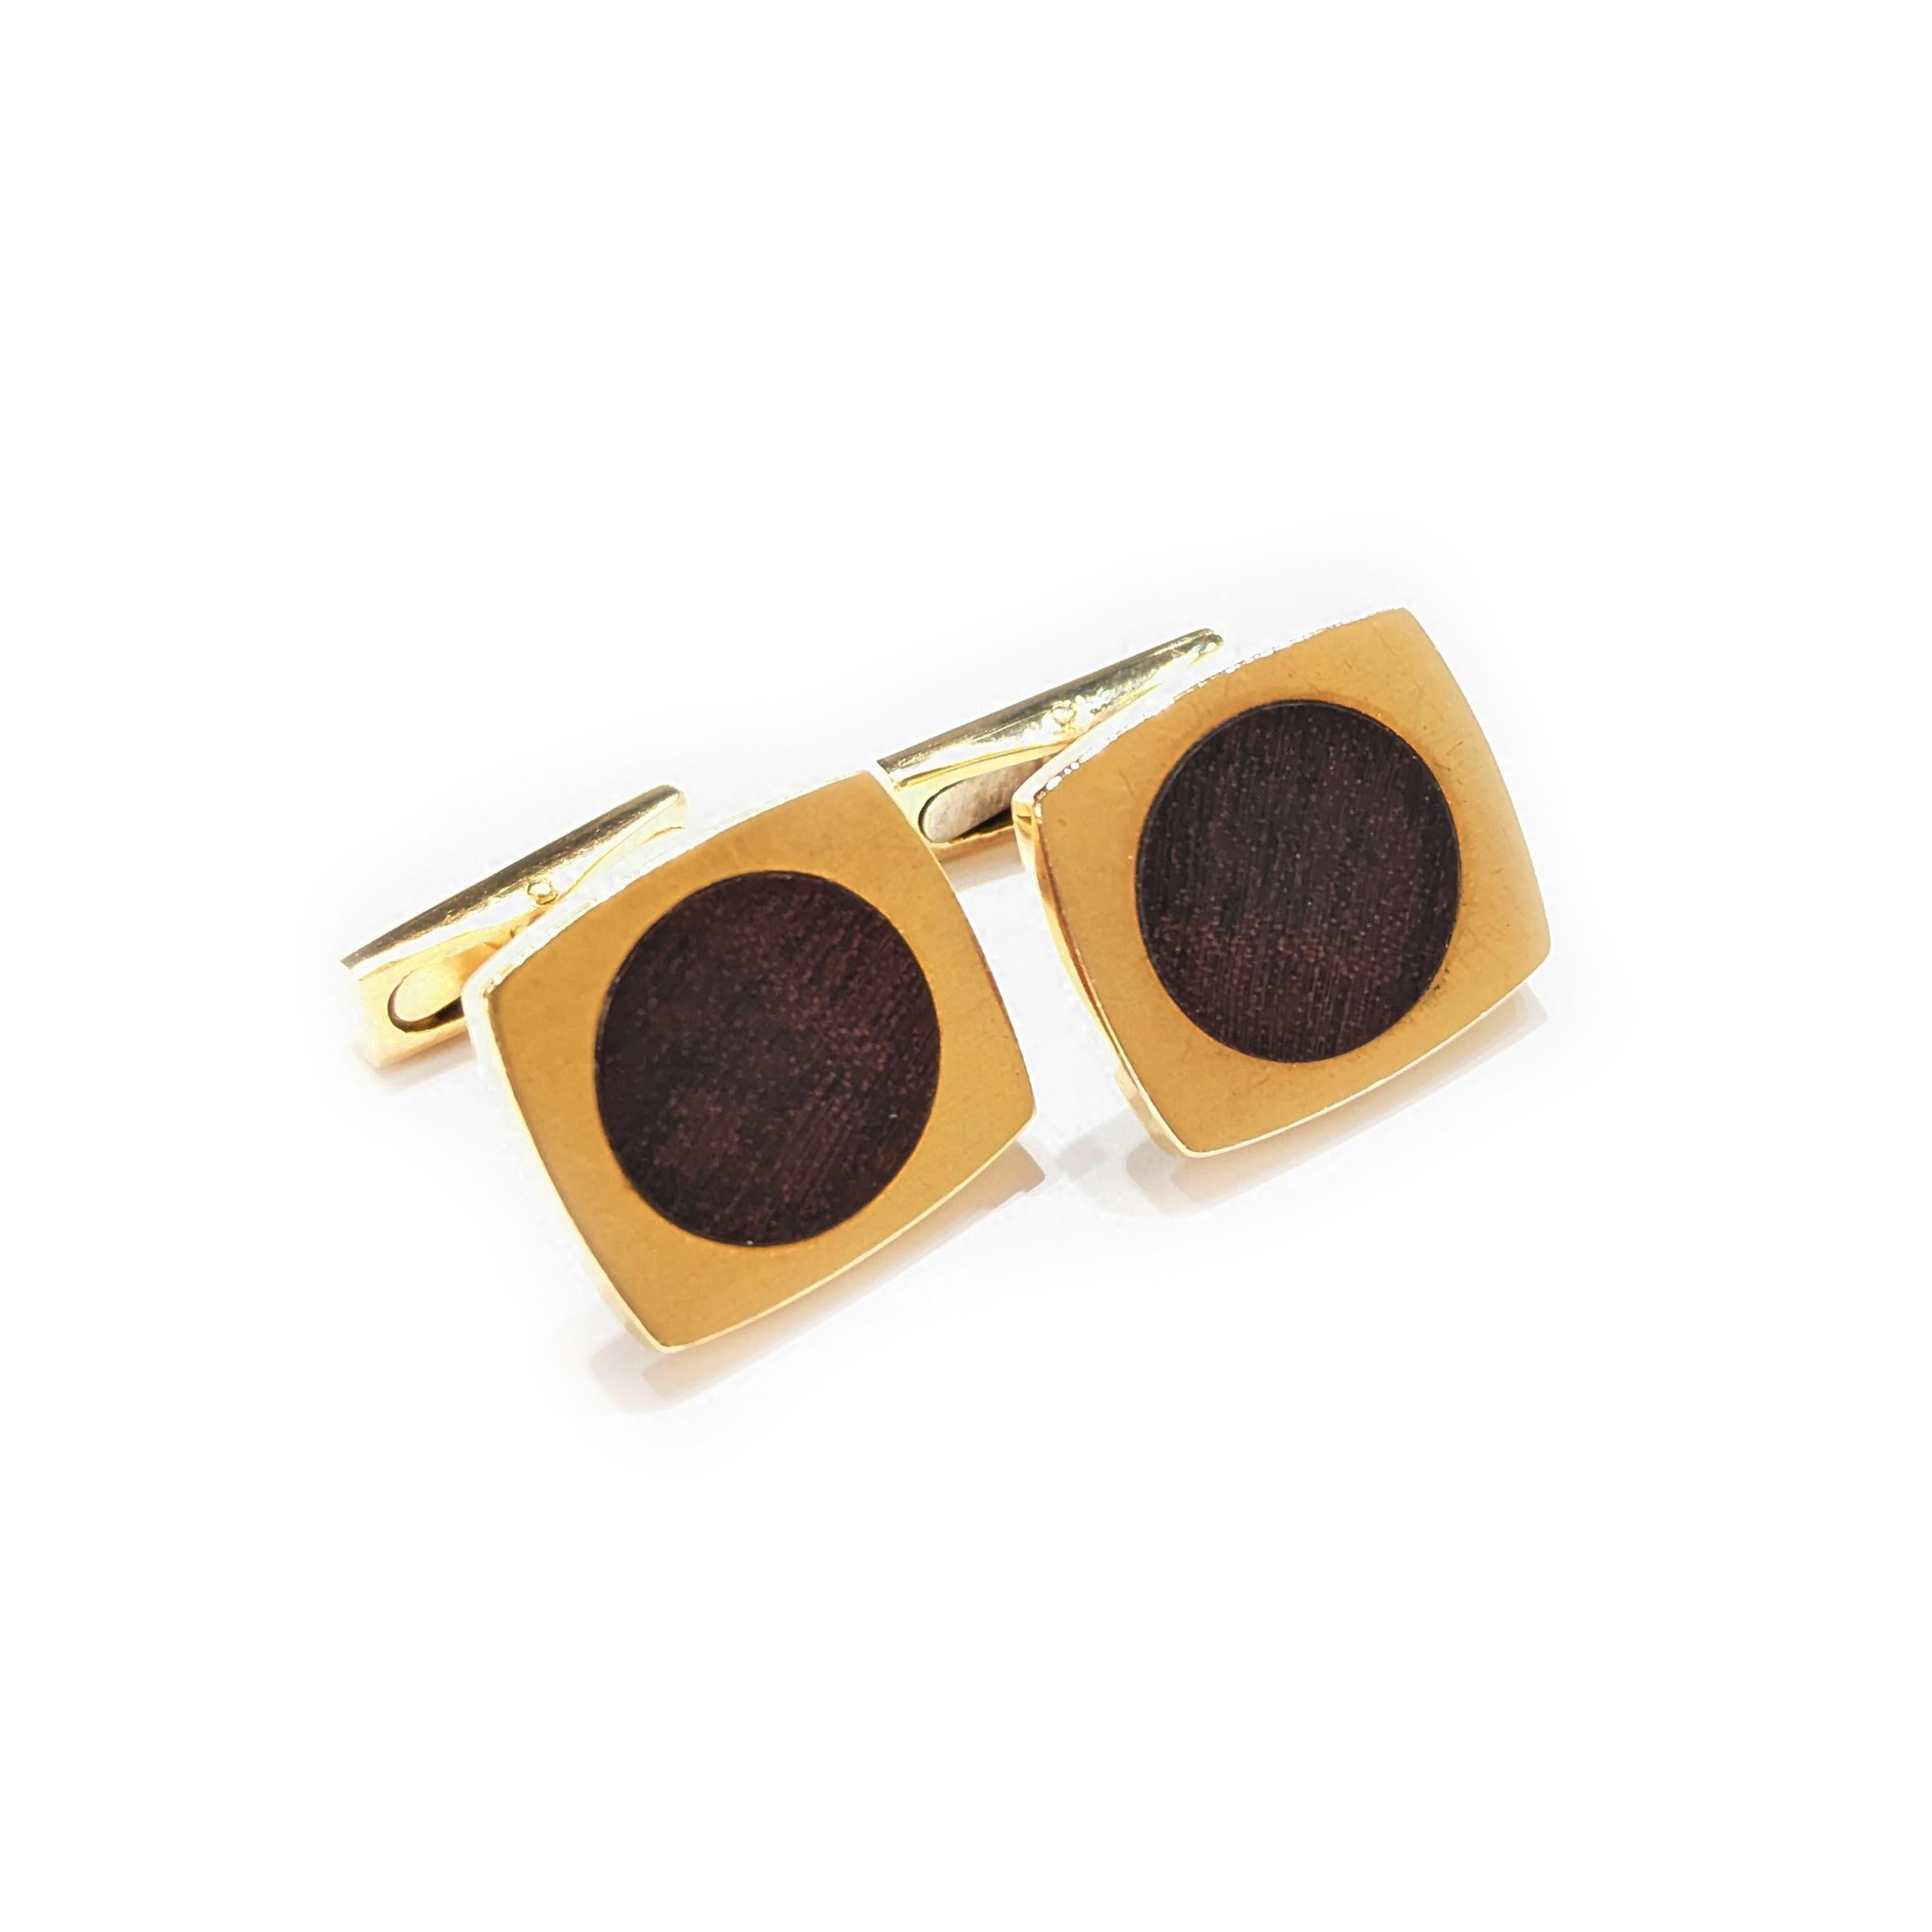 A pair of vintage Hermès wood and gold cufflinks, with teak wood discs set in gold curved sided rectangles, with bar fittings, with French eagle head marks for 18ct gold, signed HERMES Paris, numbered 6077and 6074, with a maker's mark Sté and LFV,